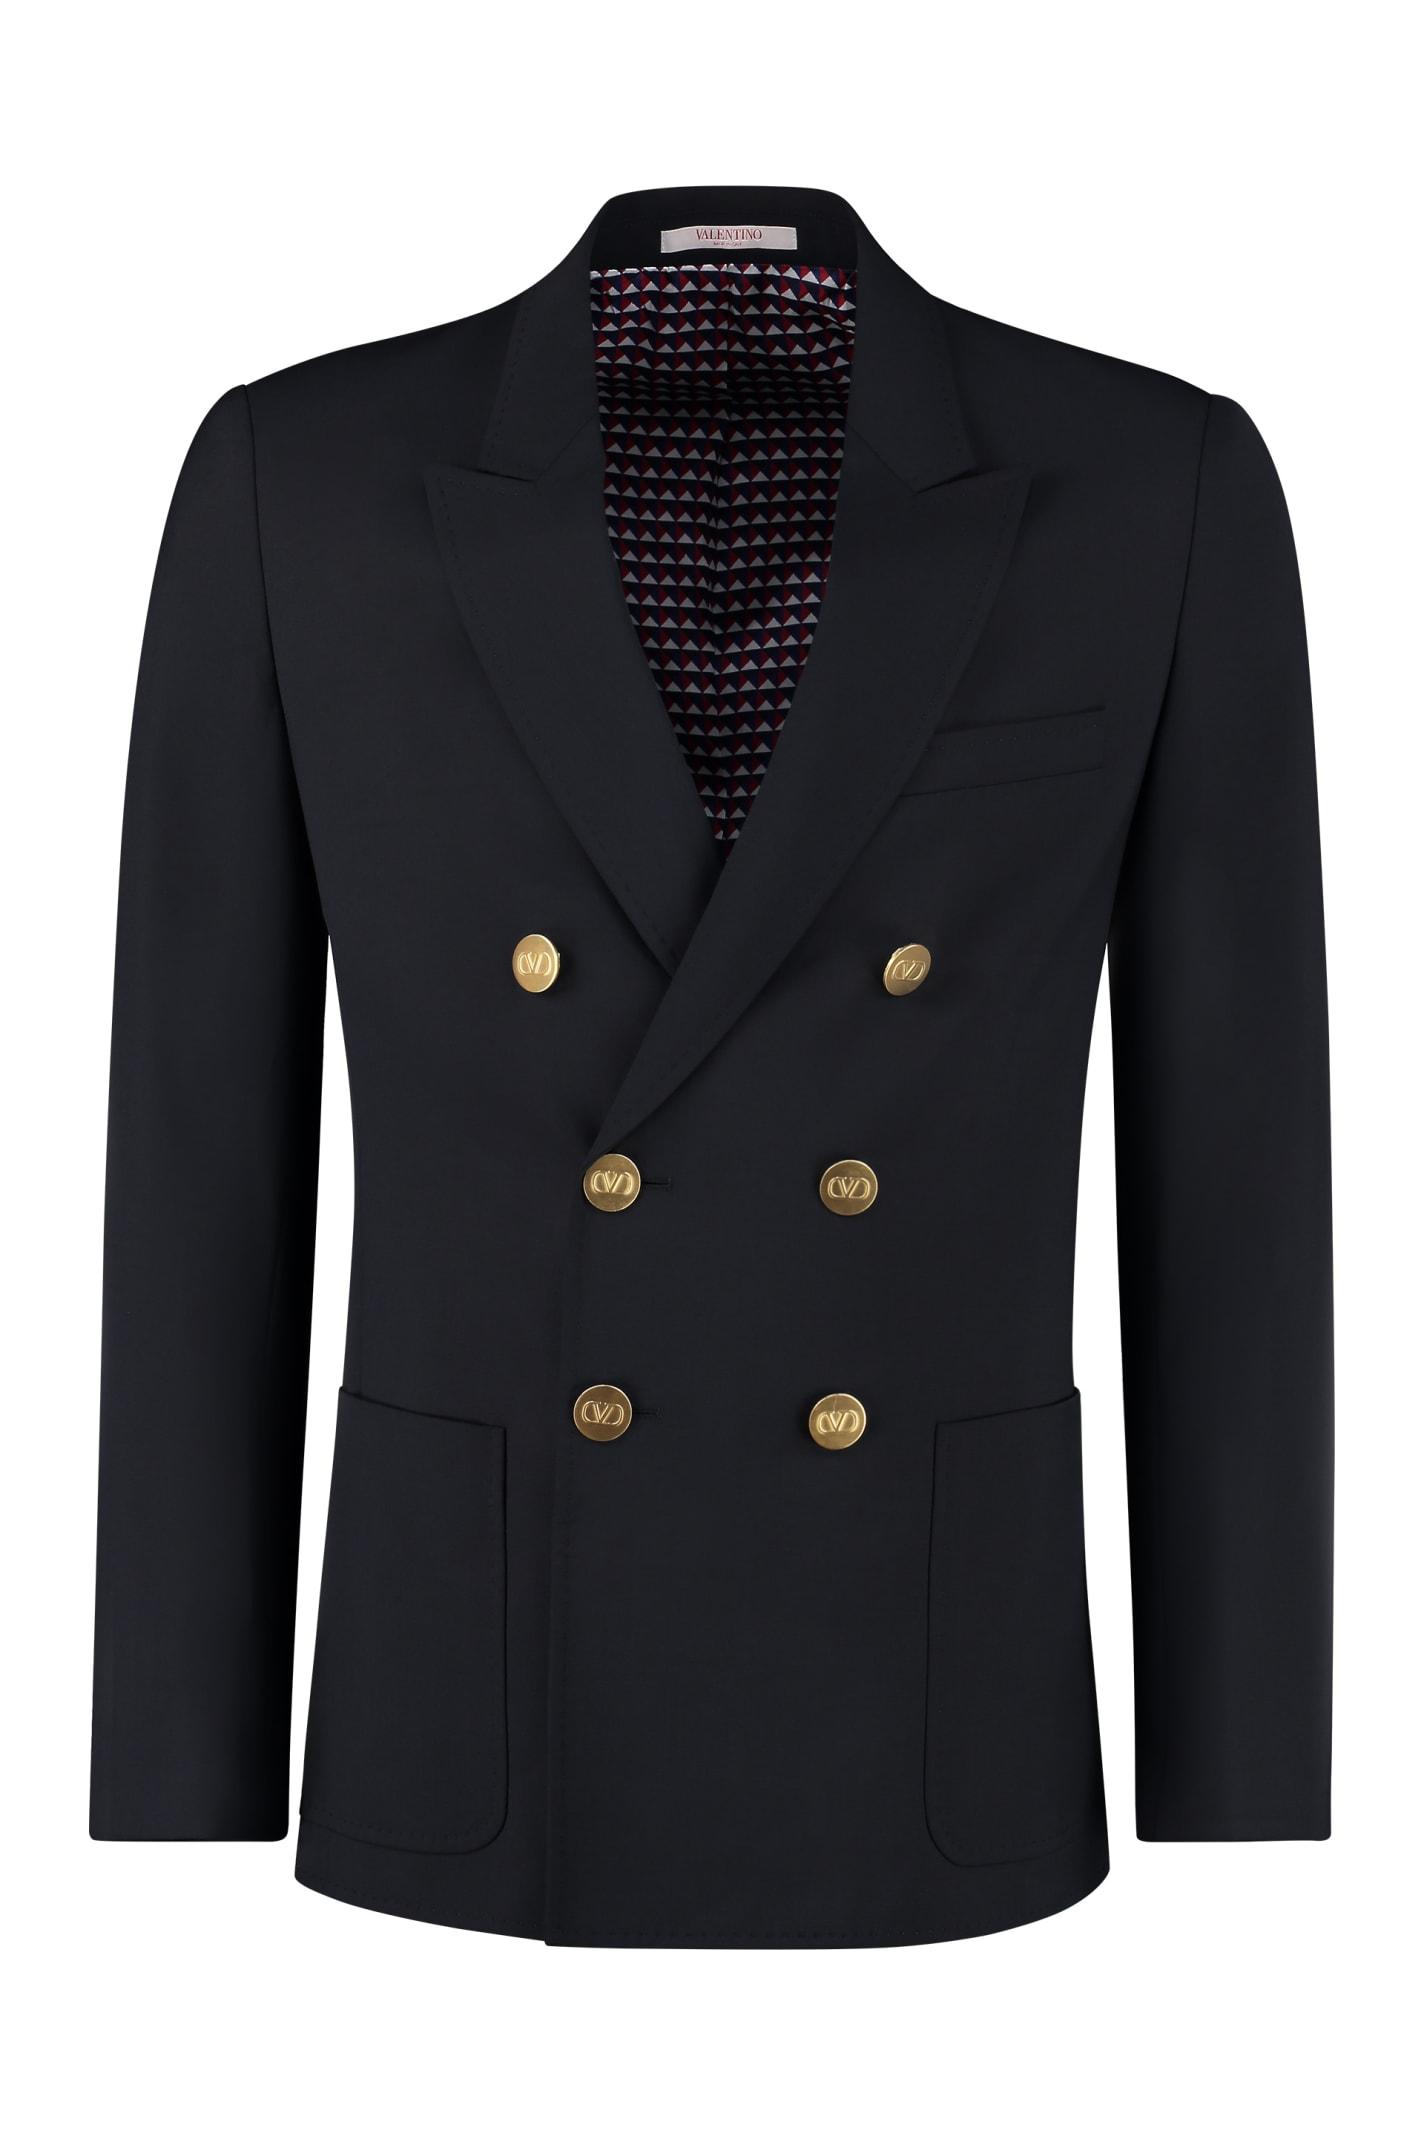 Valentino Wool Double Breasted Jacket in Blue for Men Mens Clothing Jackets Blazers Save 52% 